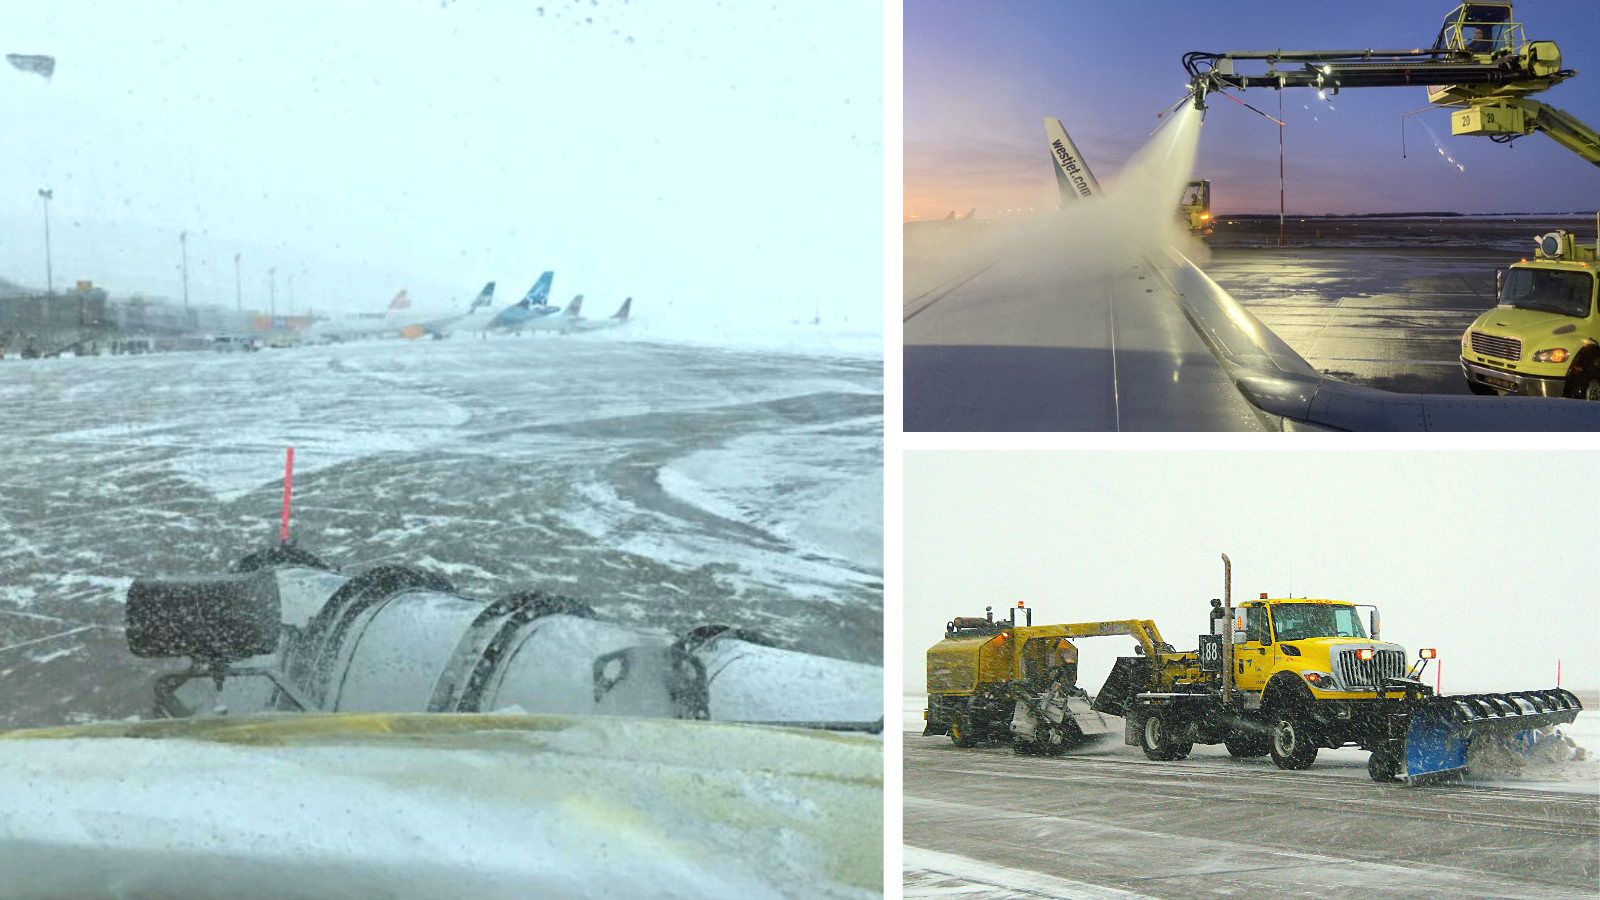 Photo of YEG operational team at work de-icing planes and clearing the runway in the winter.